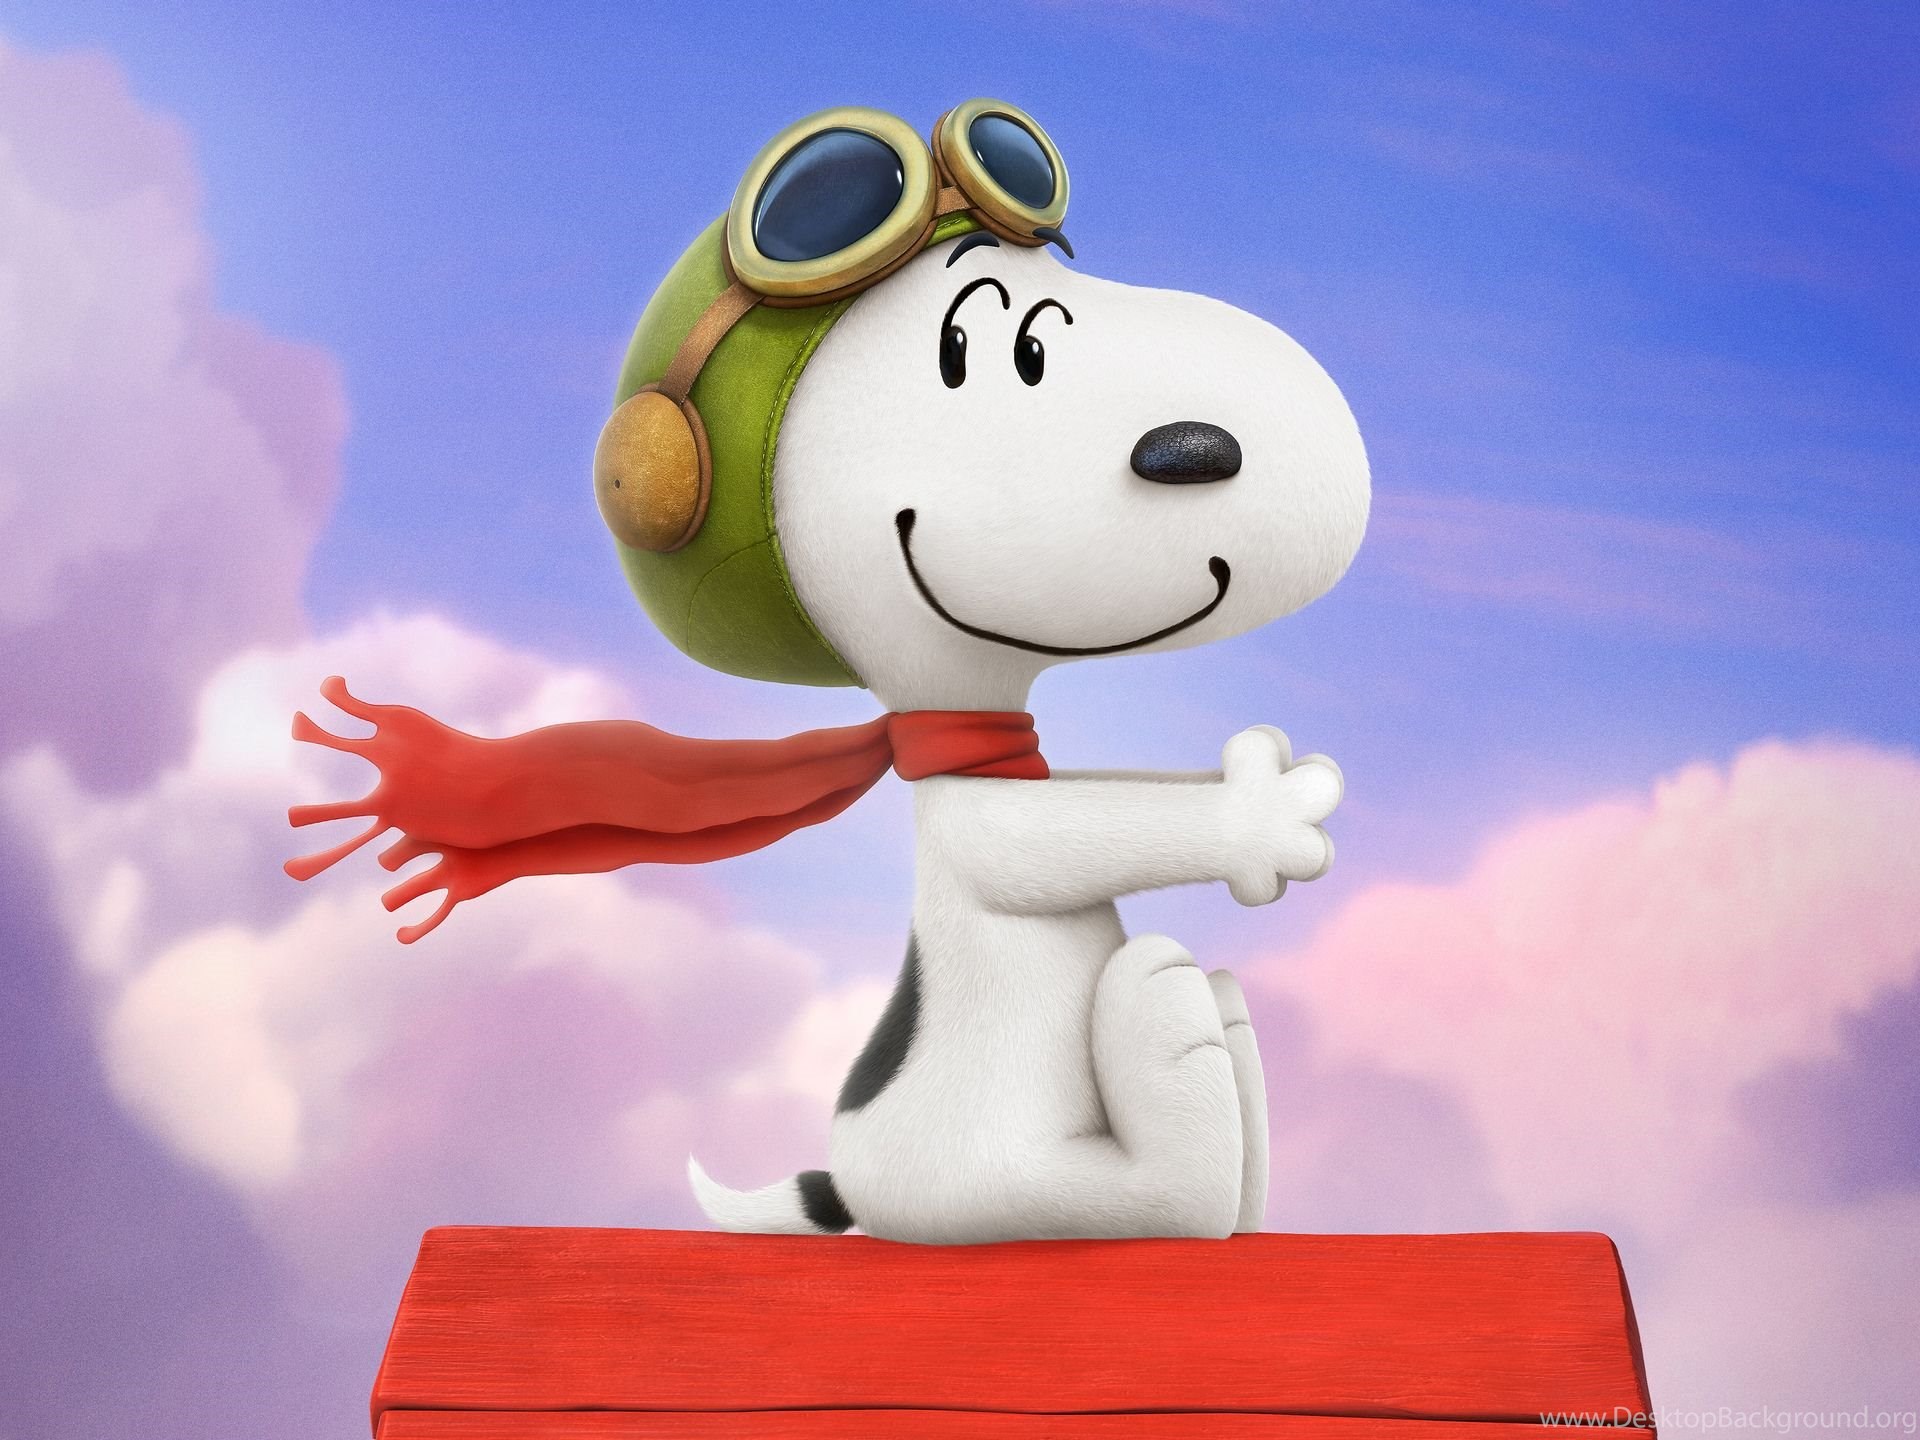 Download Snoopy Summer Wallpapers For Iphone Desktop Background.